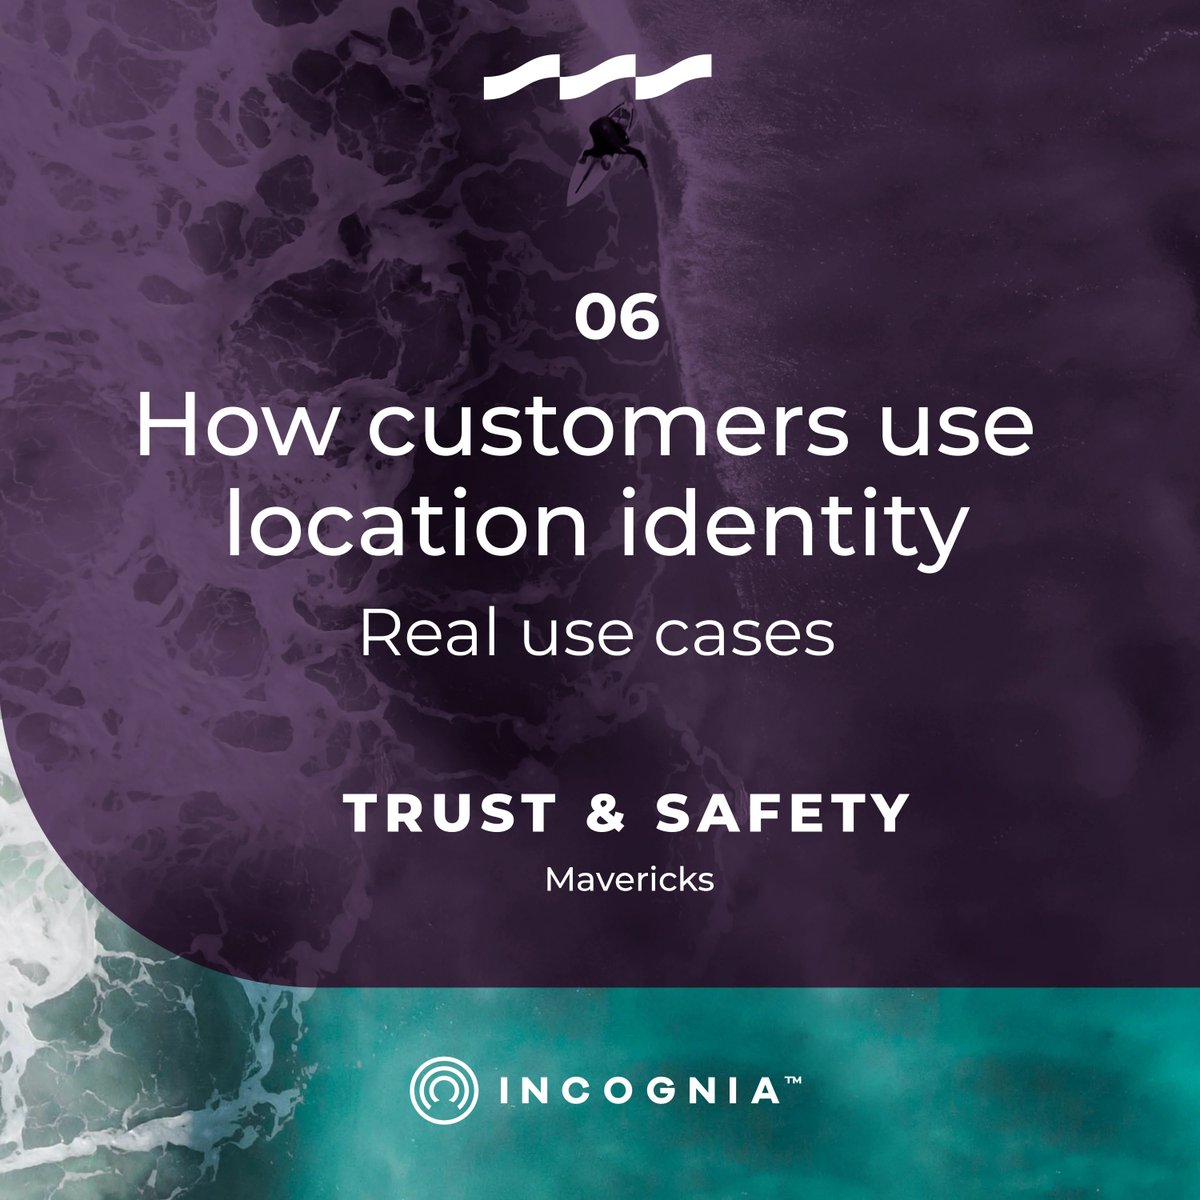 Listen to episode #6 of our Trust & Safety Mavericks podcast: How customers use Location Identity. Access the link to listen to the episode on your favorite streaming platform: hubs.ly/Q01vxzGD0